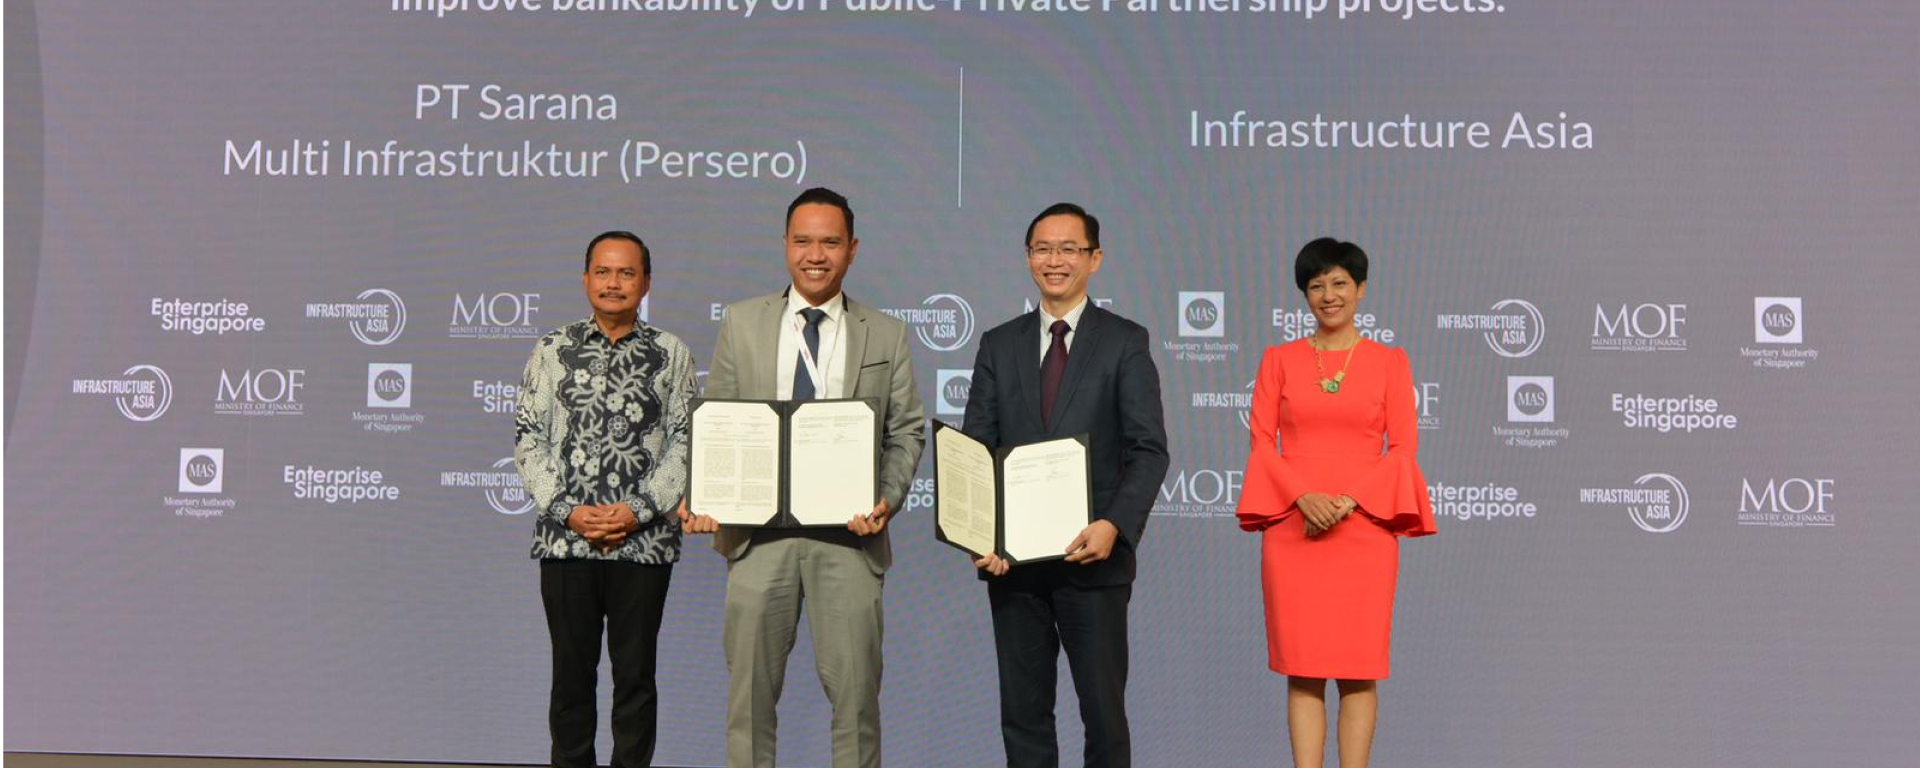 Infrastructure Asia Partners PT SMI to Raise Bankability of Infrastructure Projects in Indonesia - Banner